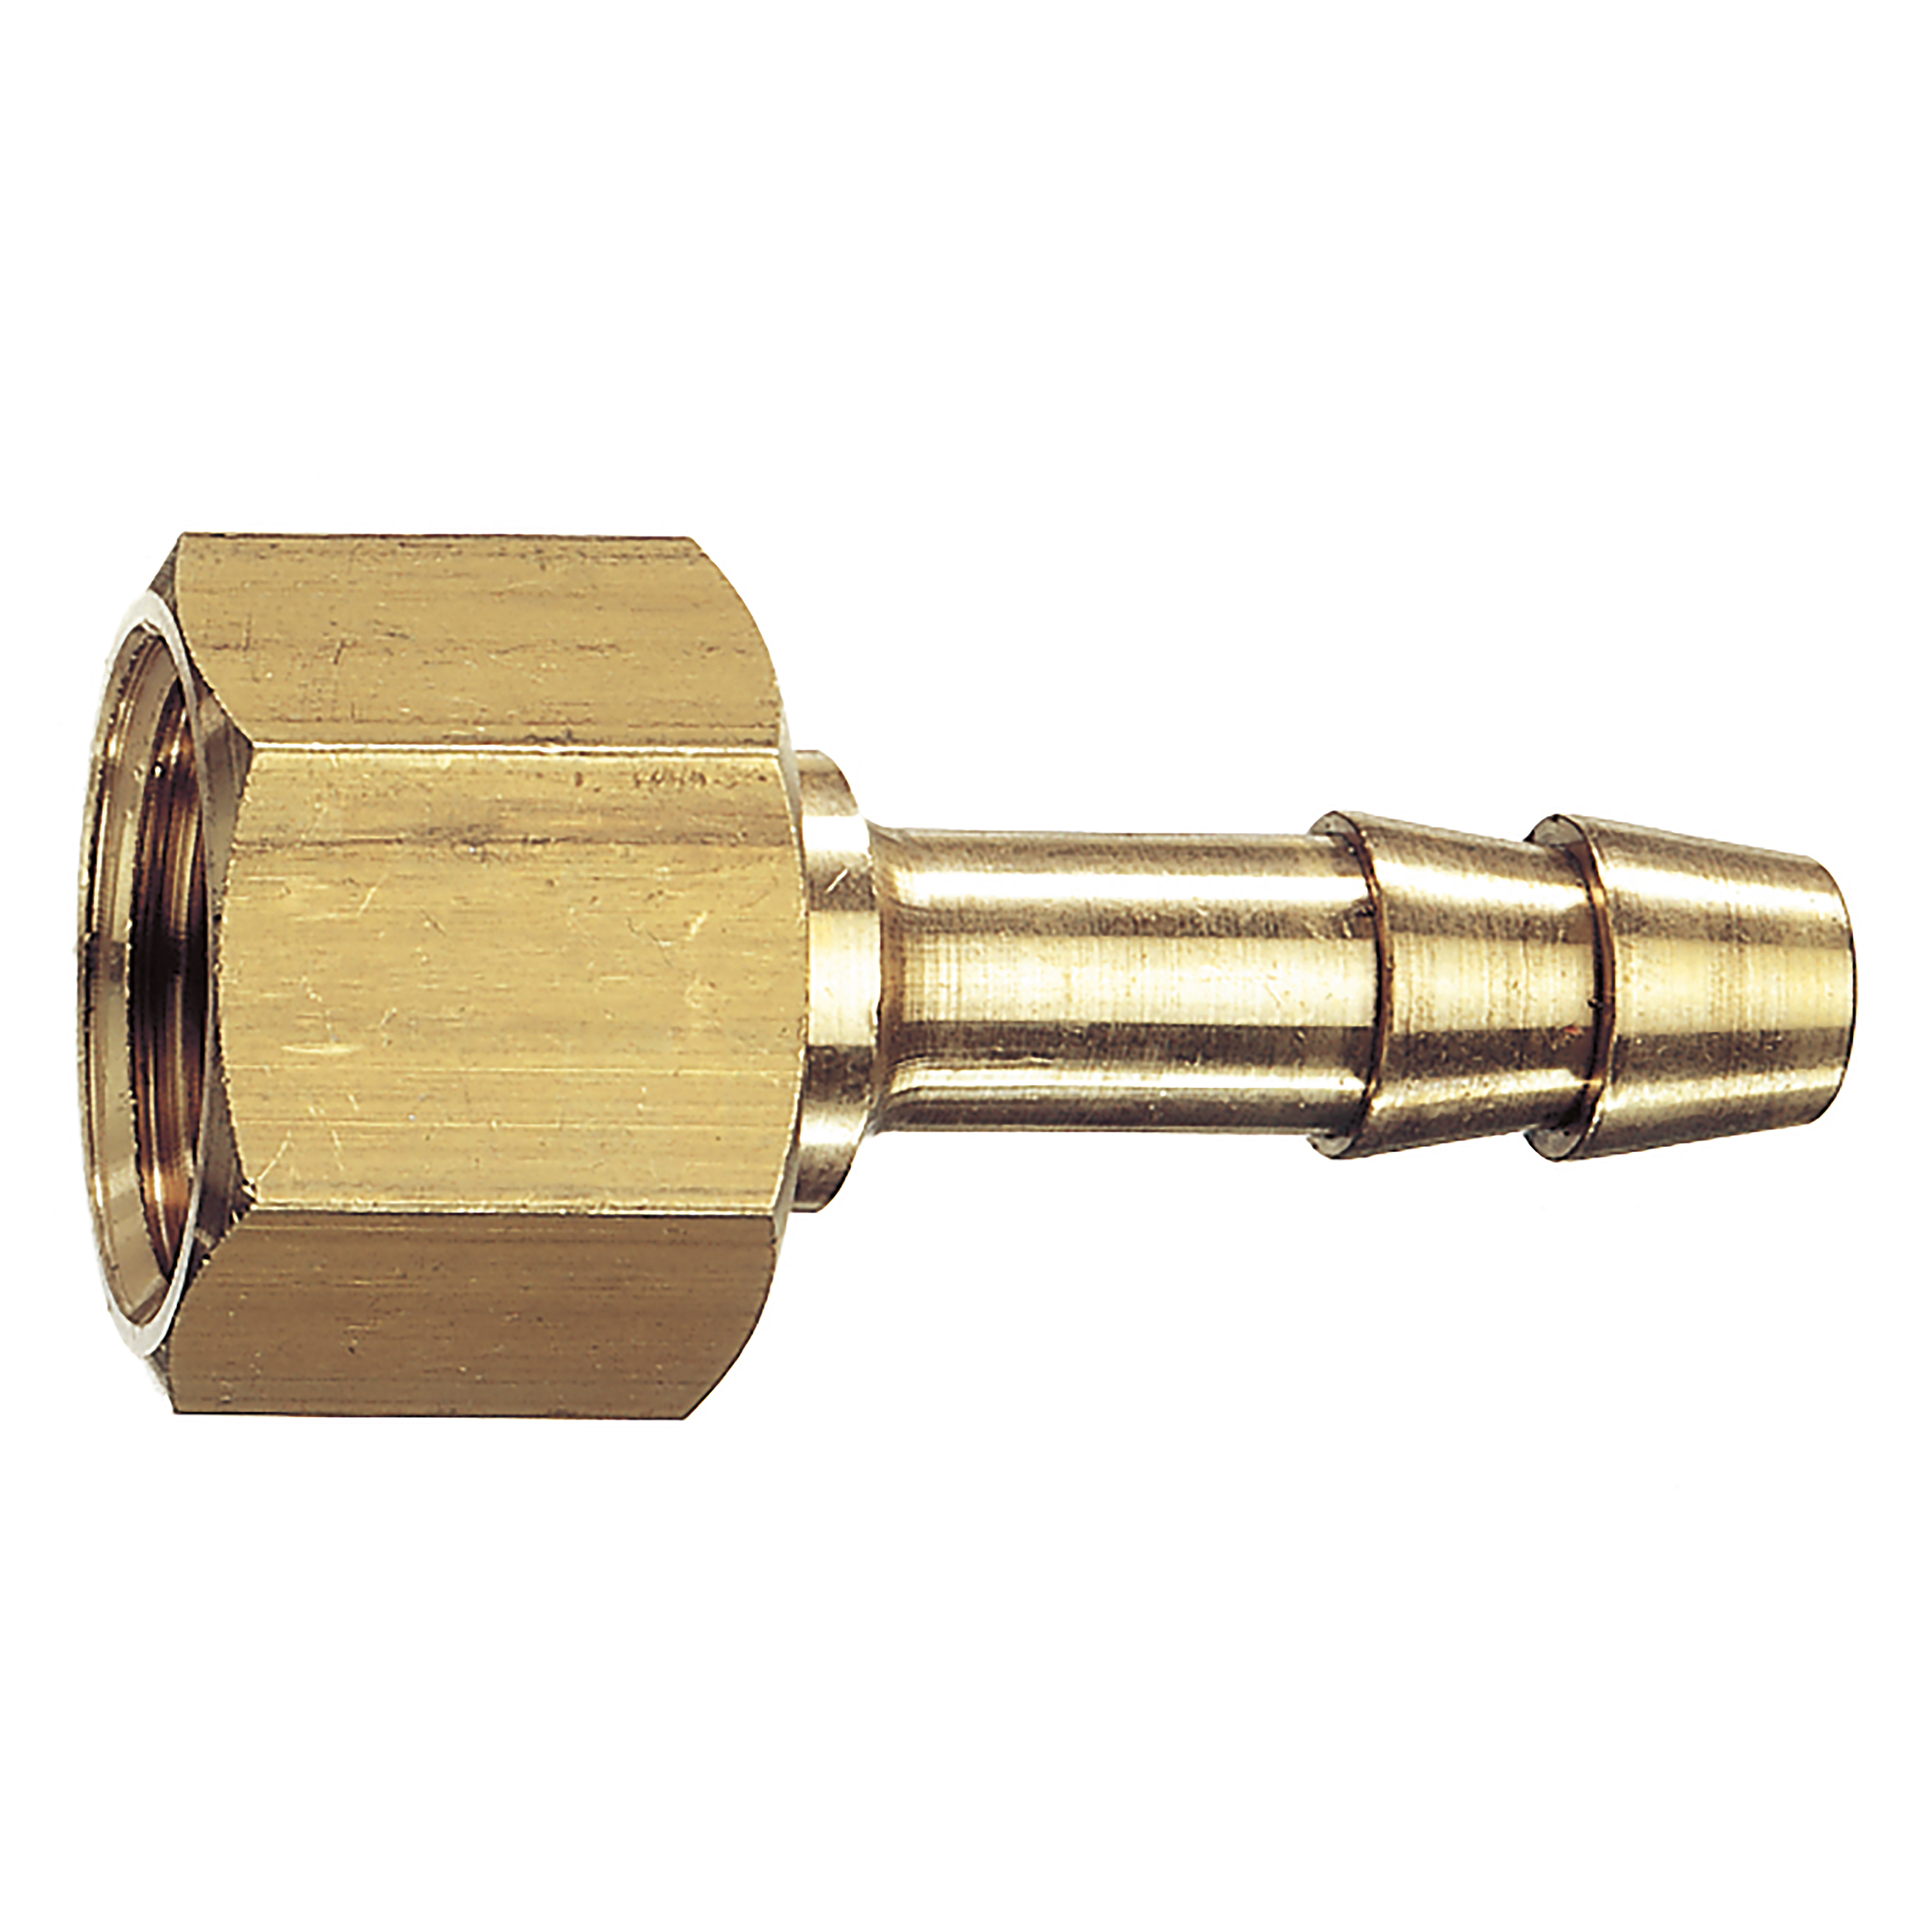 Hose fitting, detachable, connection thread: G⅜ LH, hose width: DN 4, hose nozzle with ball plug